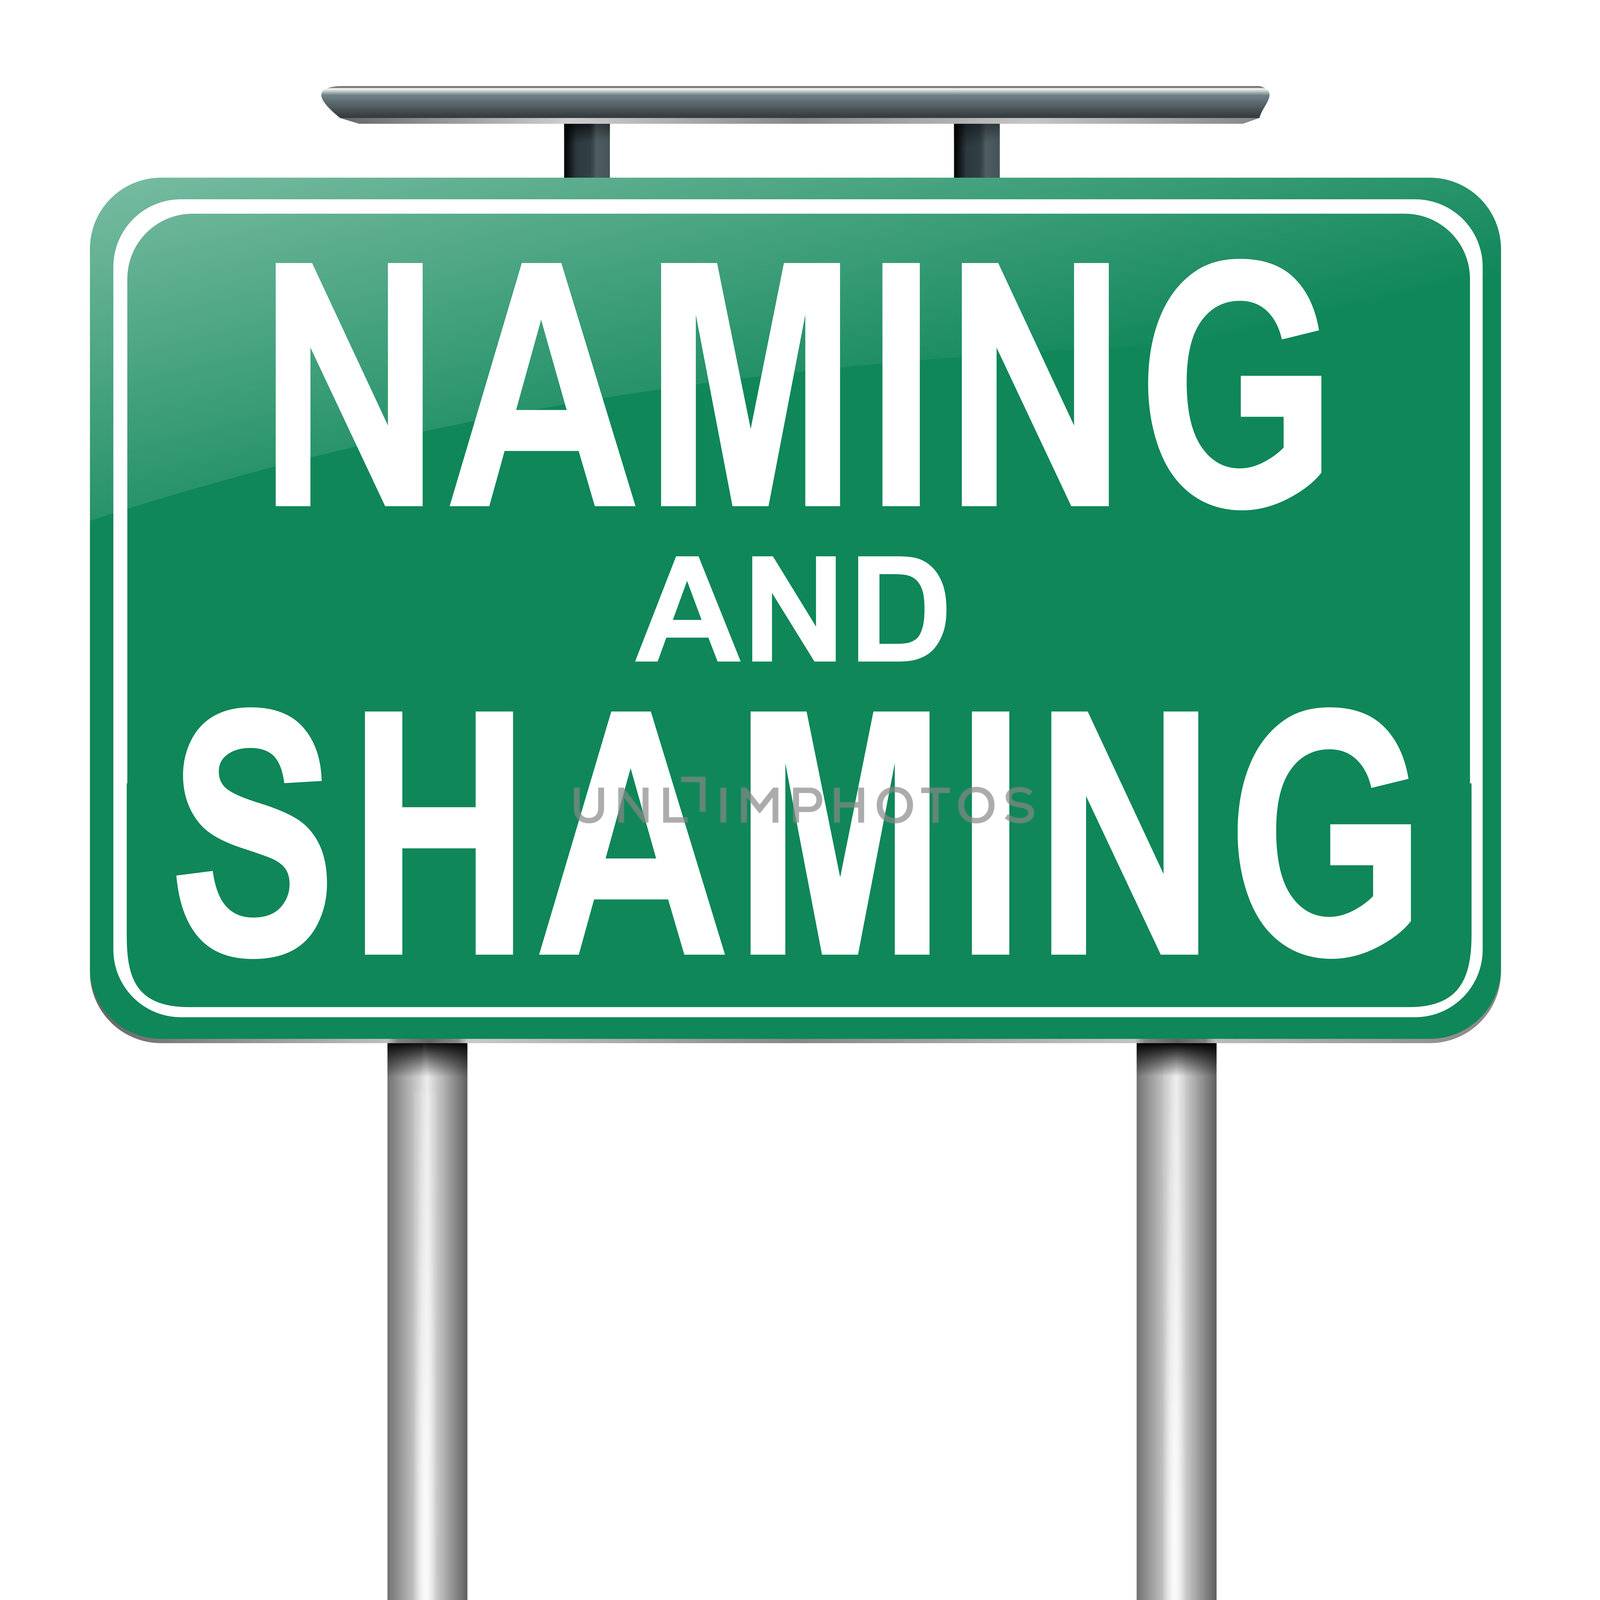 Illustration depicting a roadsign with a naming and shaming concept. White background.